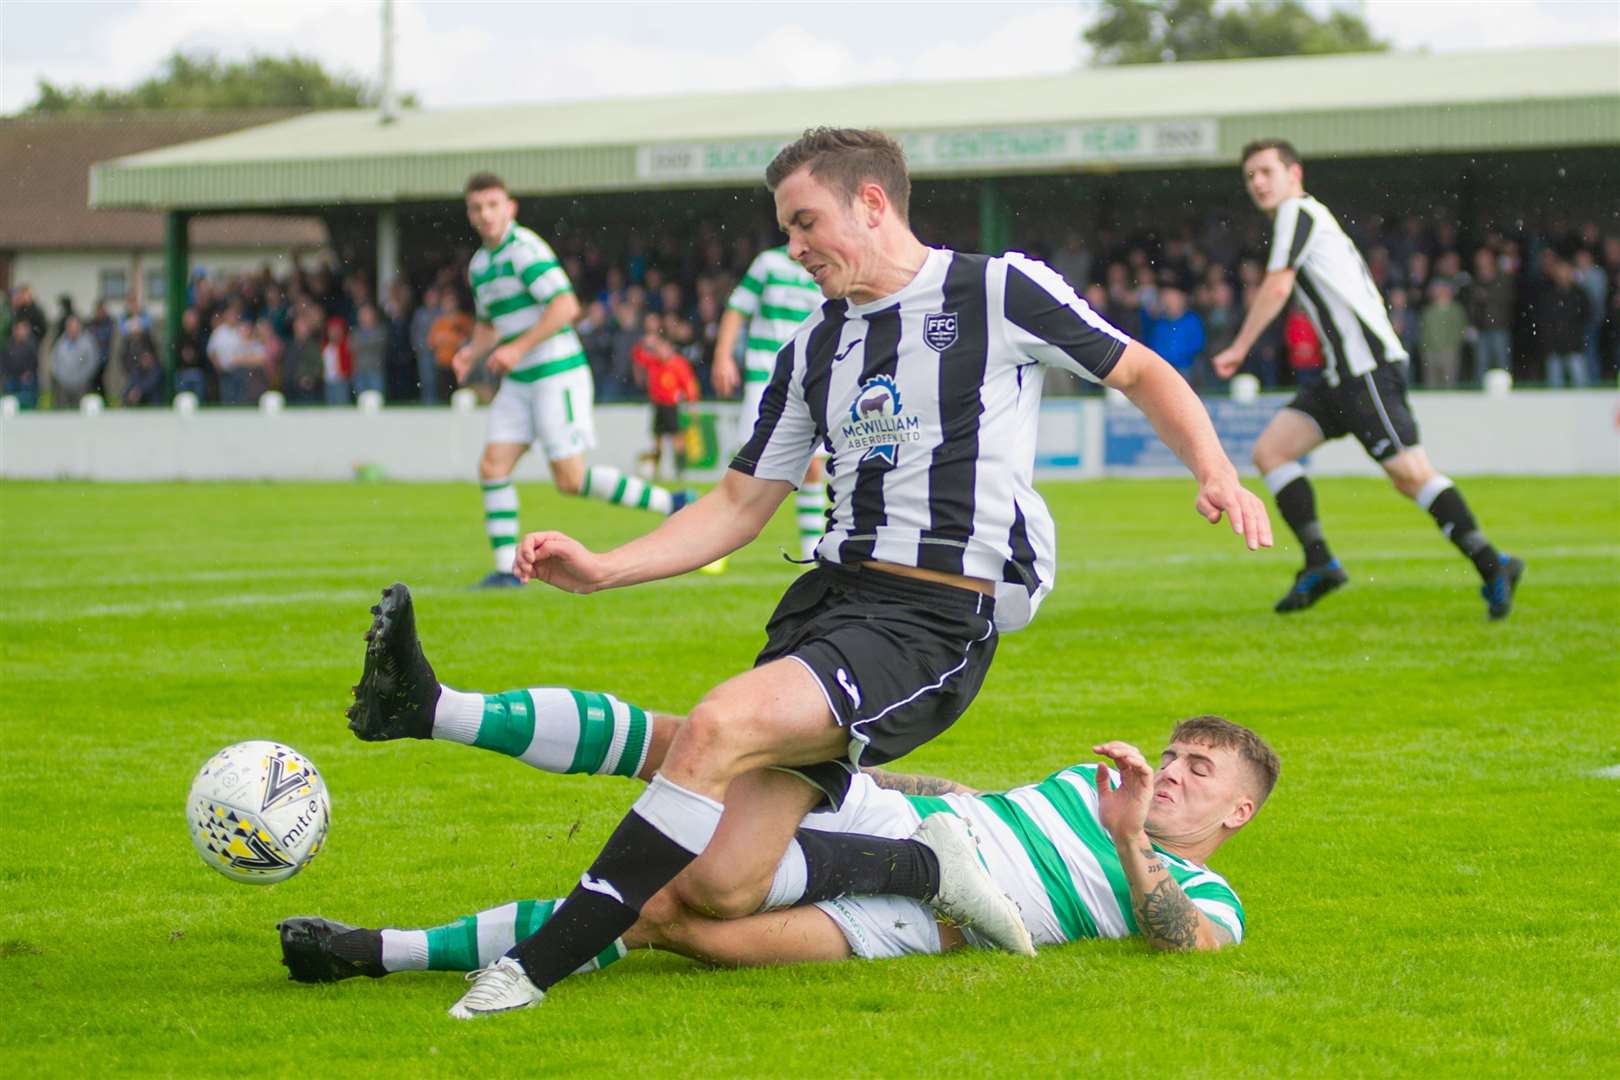 Buckie Thistle's Joe McCabe slides in on Fraserburgh's Paul Campbell to win the ball back for the home side...Buckie Thistle (1) vs Fraserburgh FC (2) - Victoria Park, Buckie - Highland Football League 17/08/2019...Picture: Daniel Forsyth. Image No.044617.